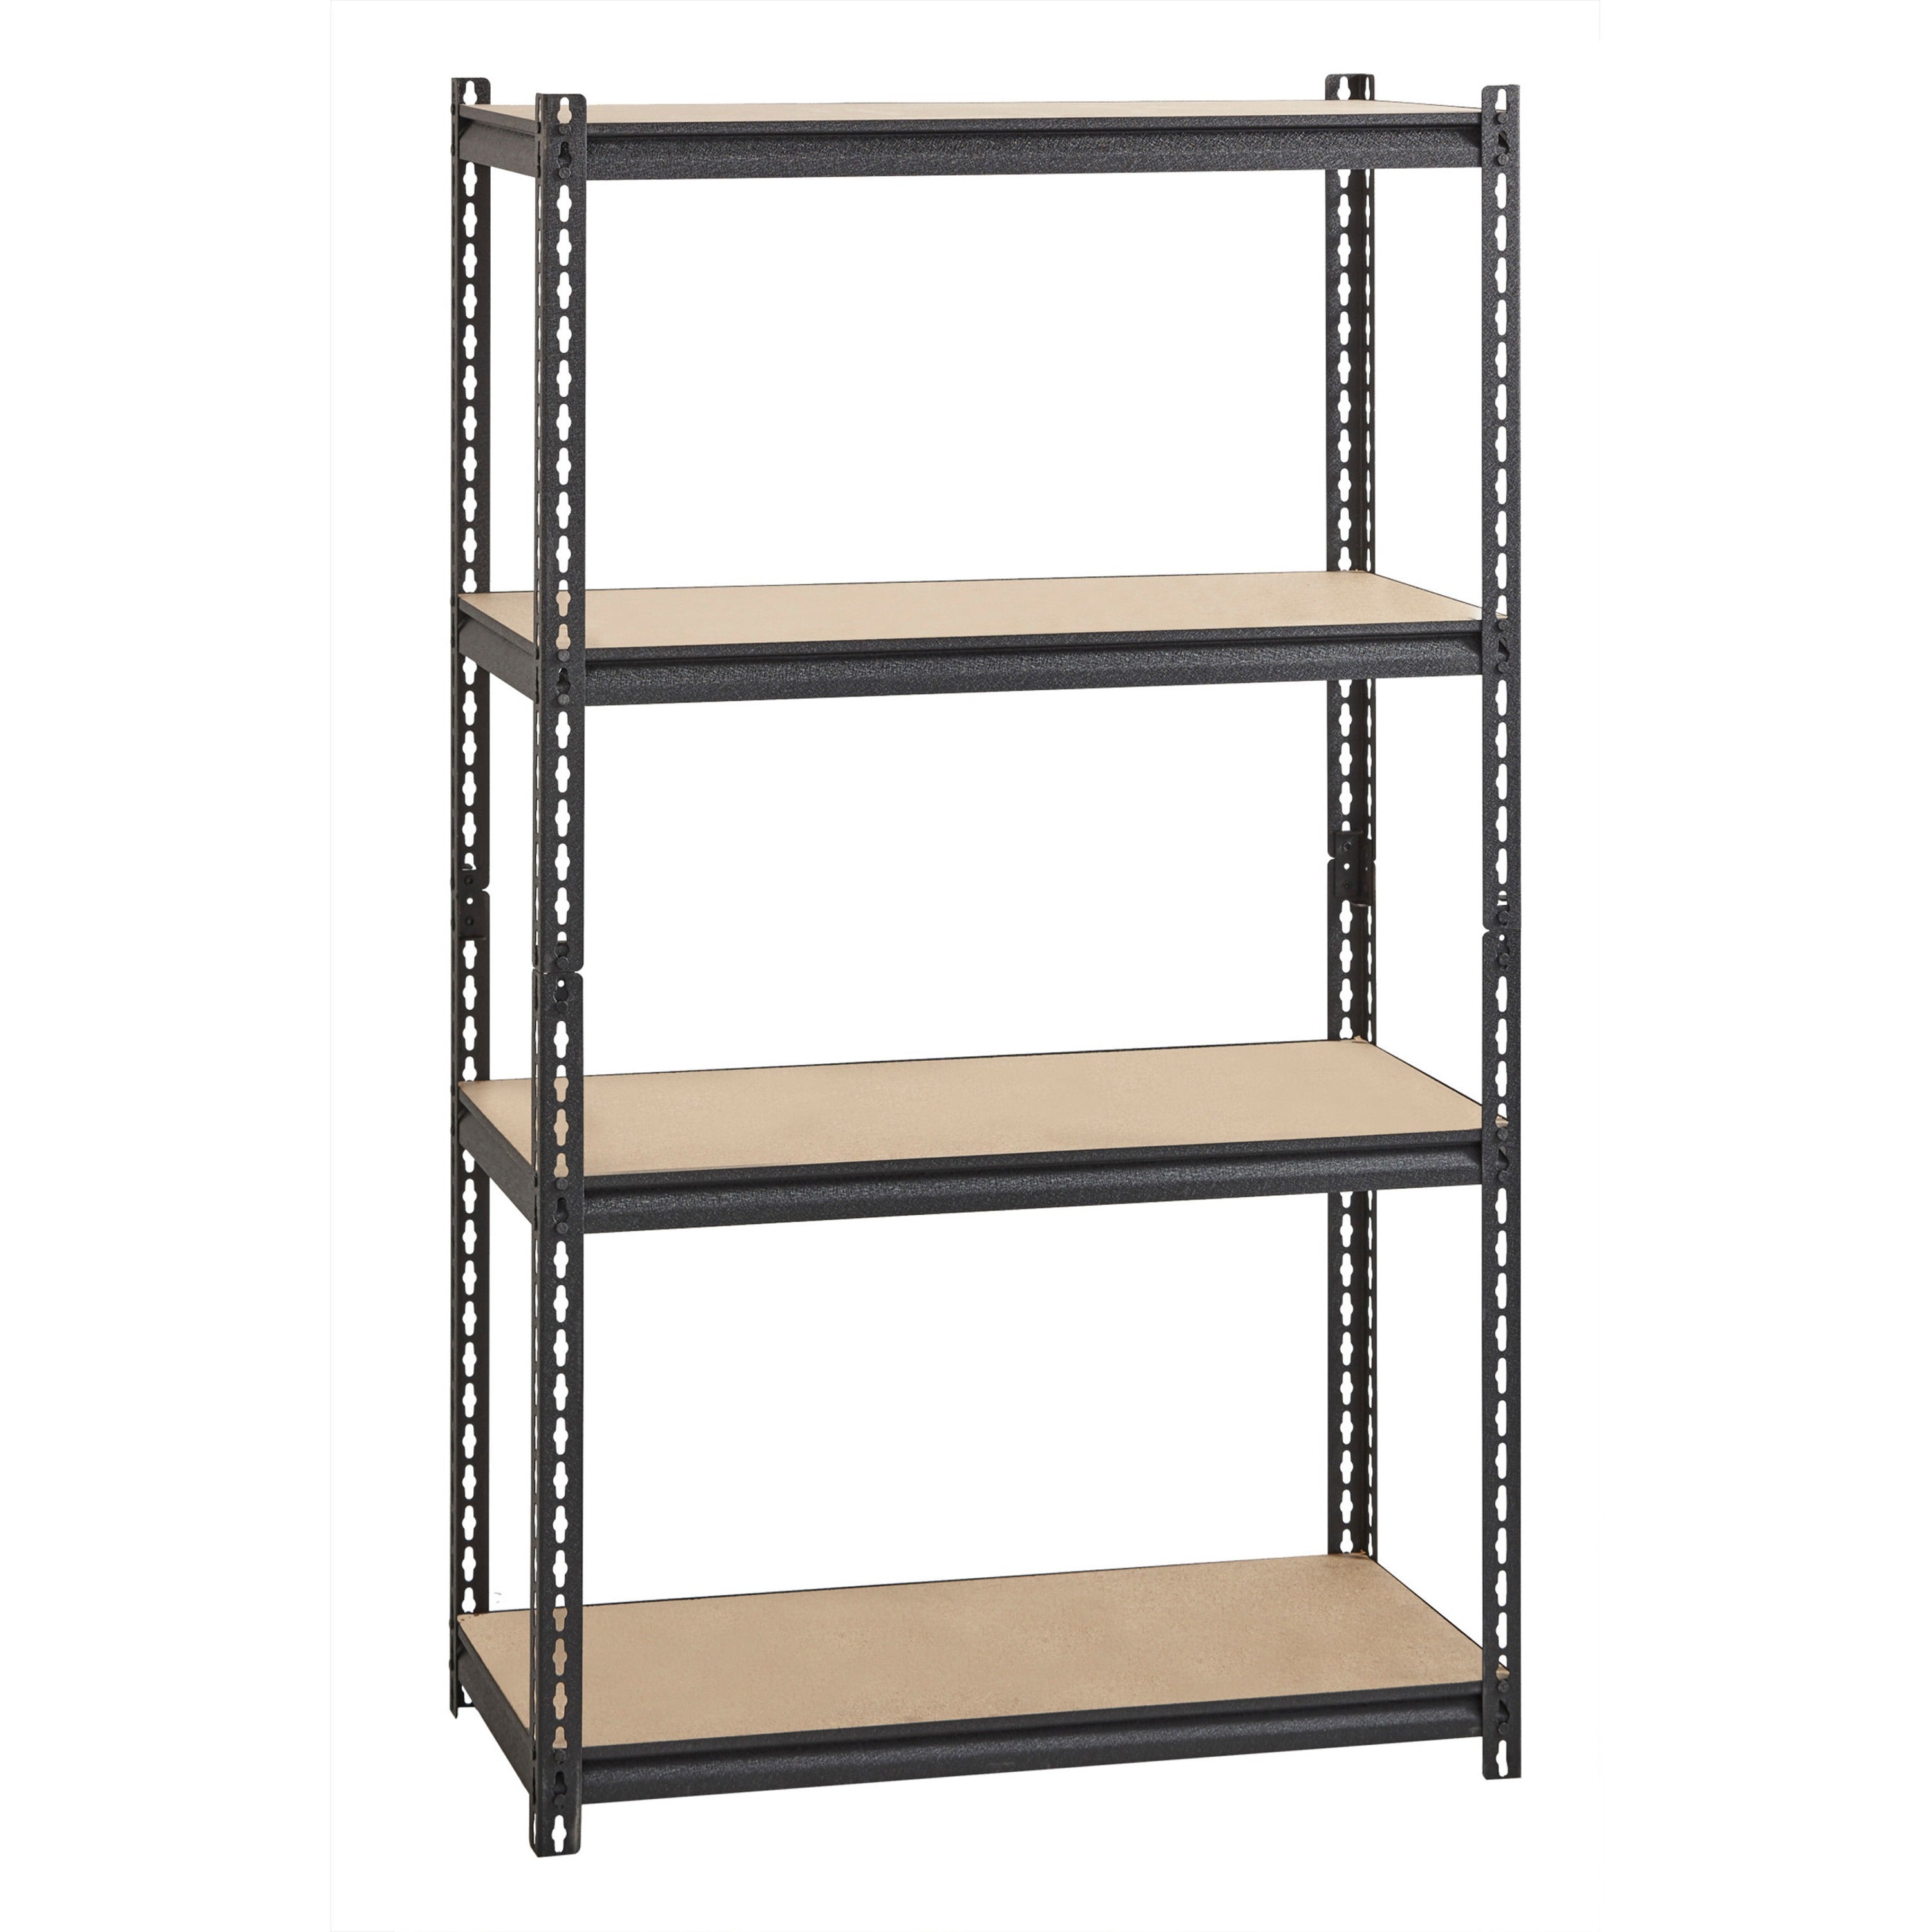 lorell-iron-horse-2300-lb-capacity-riveted-shelving-4-shelfves-60-height-x-36-width-x-18-depth-30%-recycled-black-steel-particleboard-1-each_llr59696 - 1